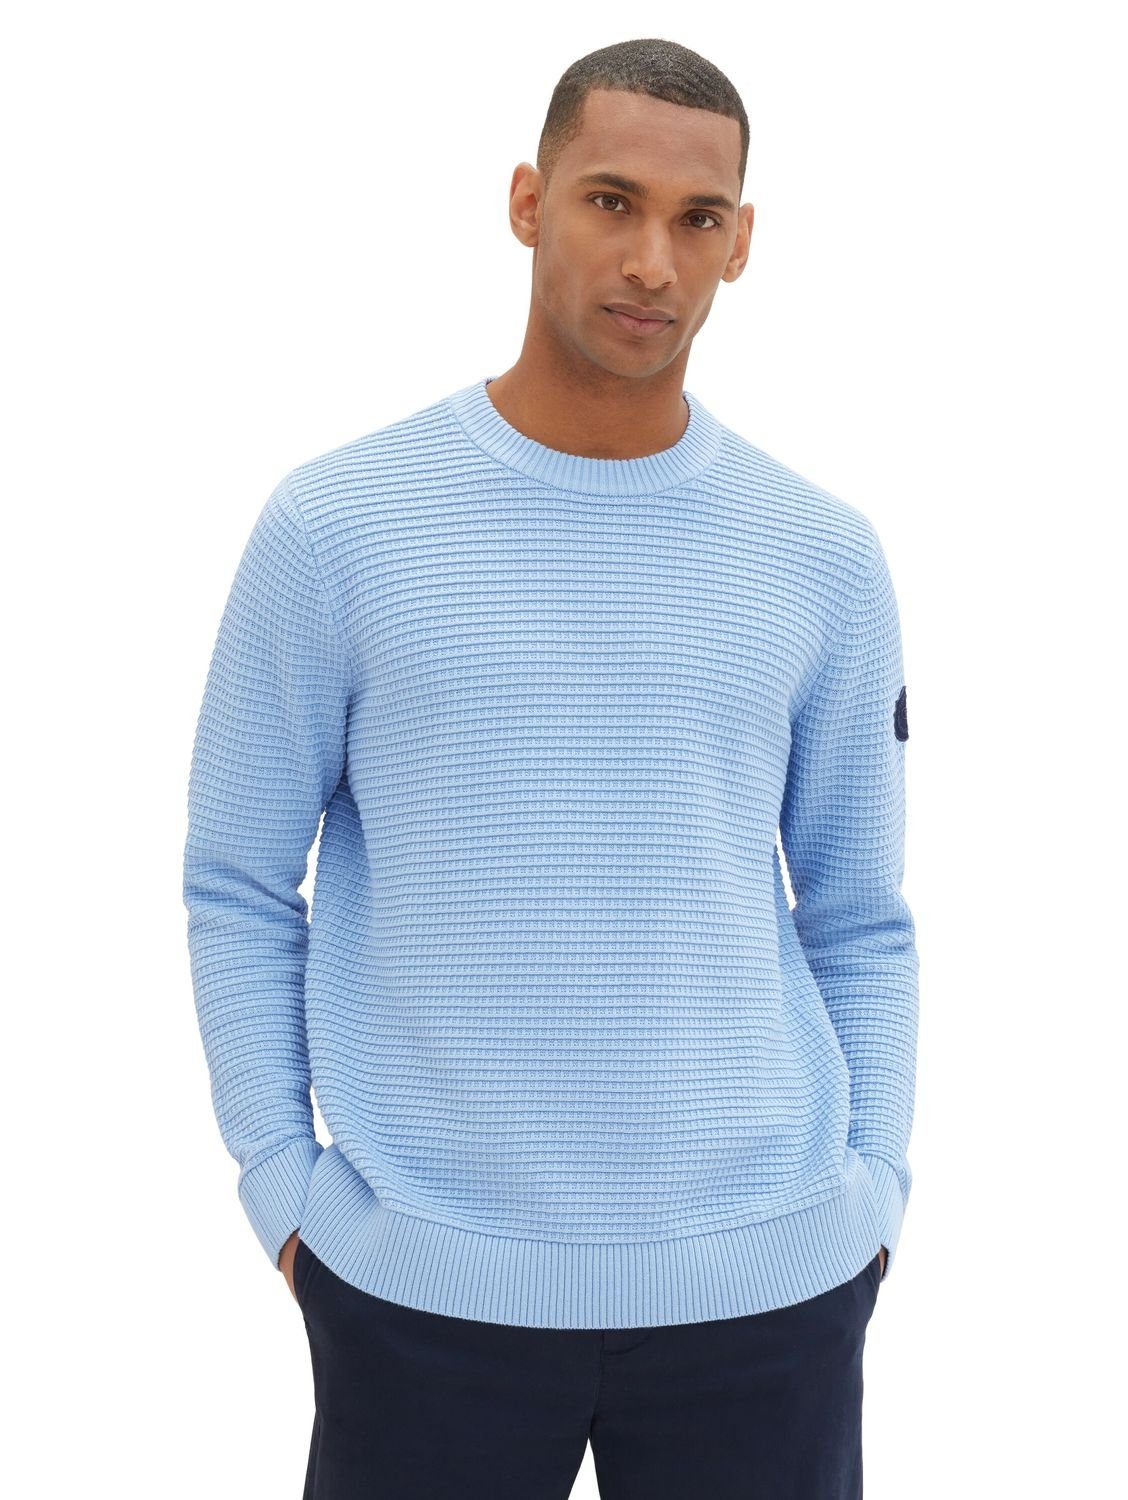 STRUCTURED 32245 TOM Washed TAILOR KNIT Out Blue Baumwolle Strickpullover Middle aus CREWNECK